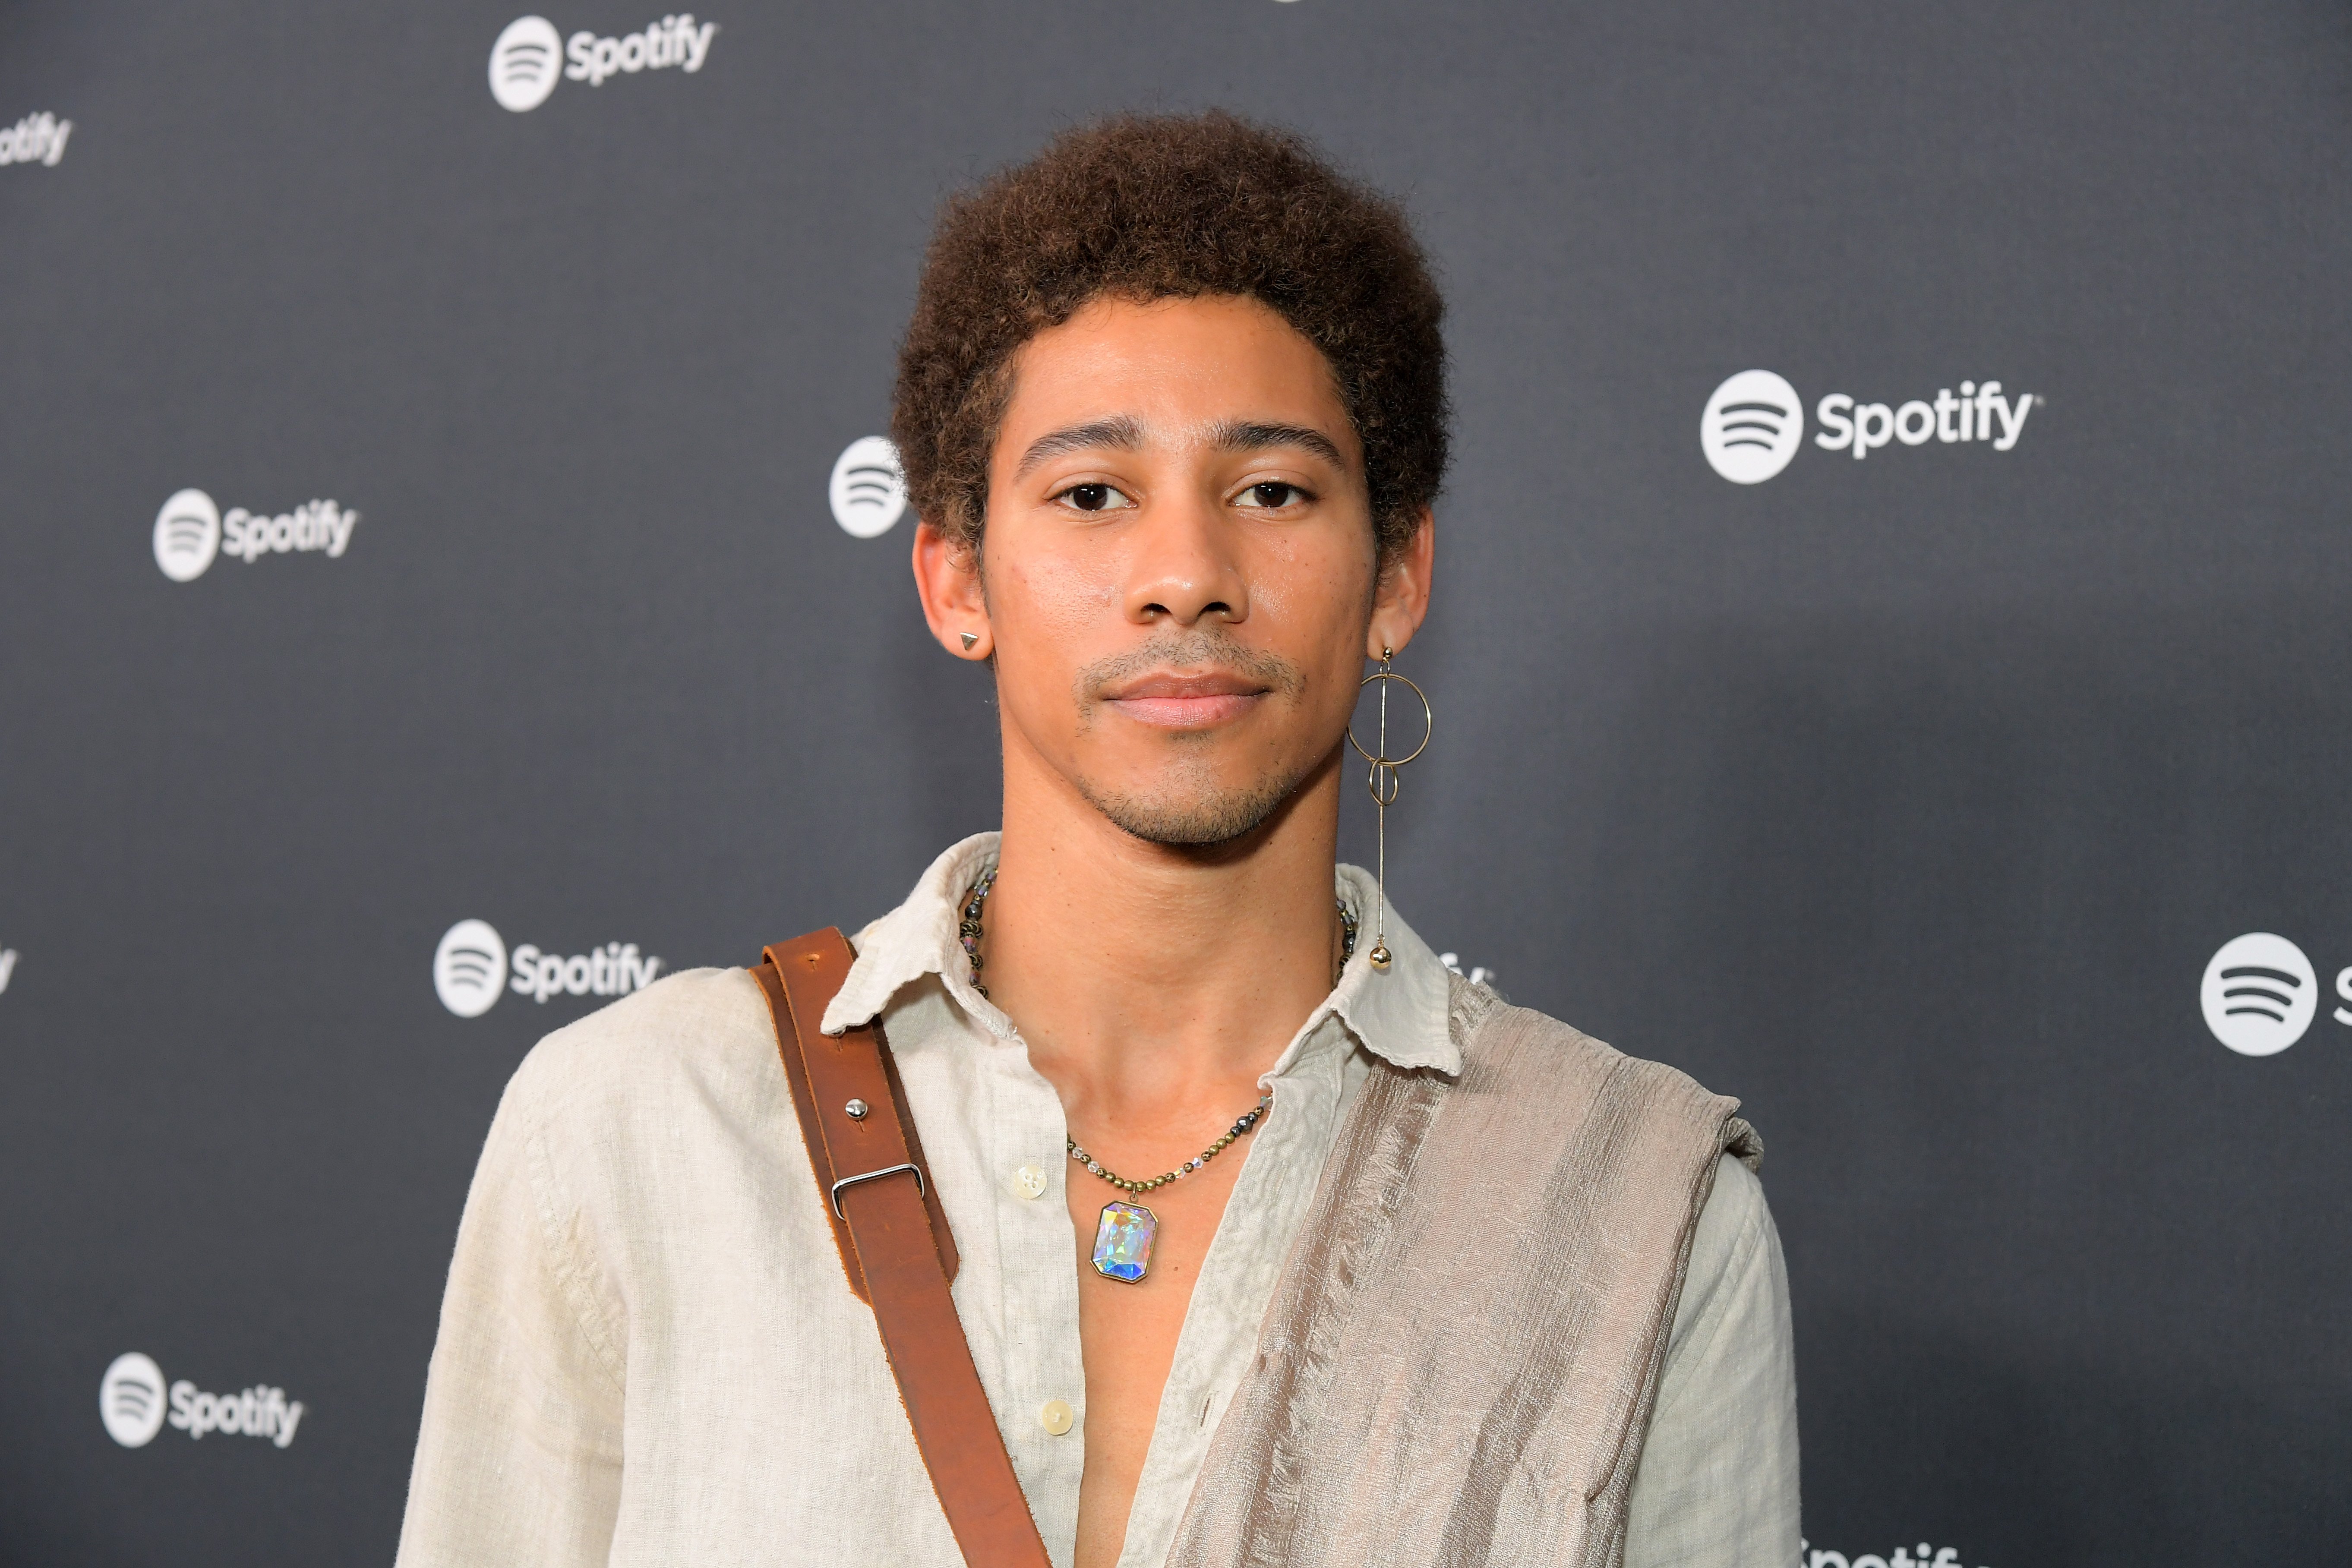 Keiynan Lonsdale attends Spotify's "Best New Artist" Party at The Lot Studios on January 23, 2020 in Los Angeles, California. | Source: Getty Images